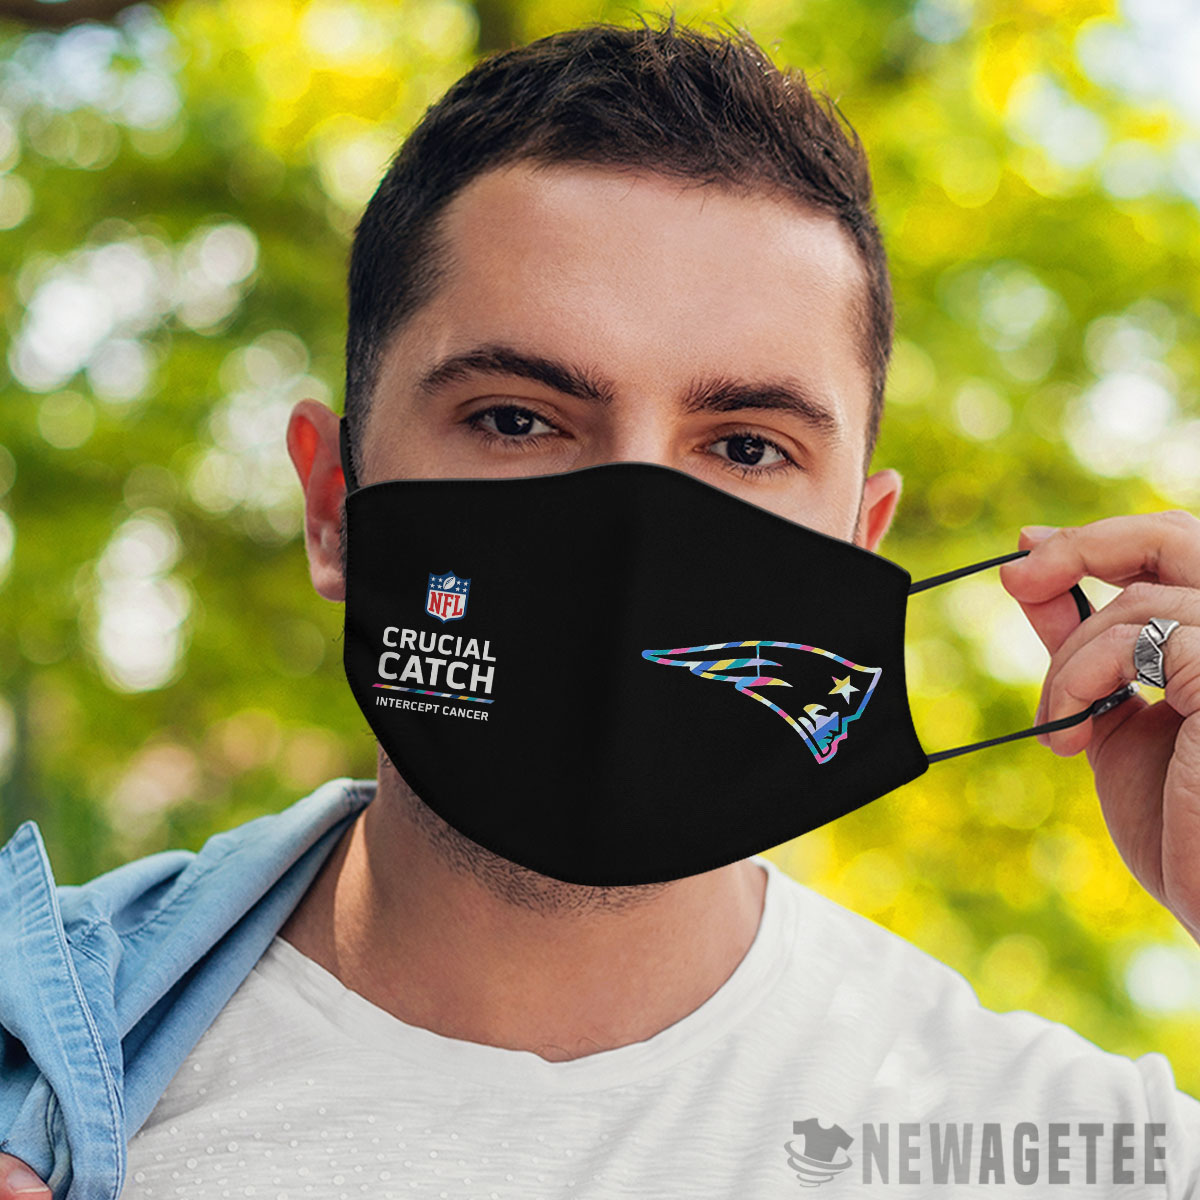 New England Patriots Nfl Crucial Catch Multicolor Face Mask Anti-pollution